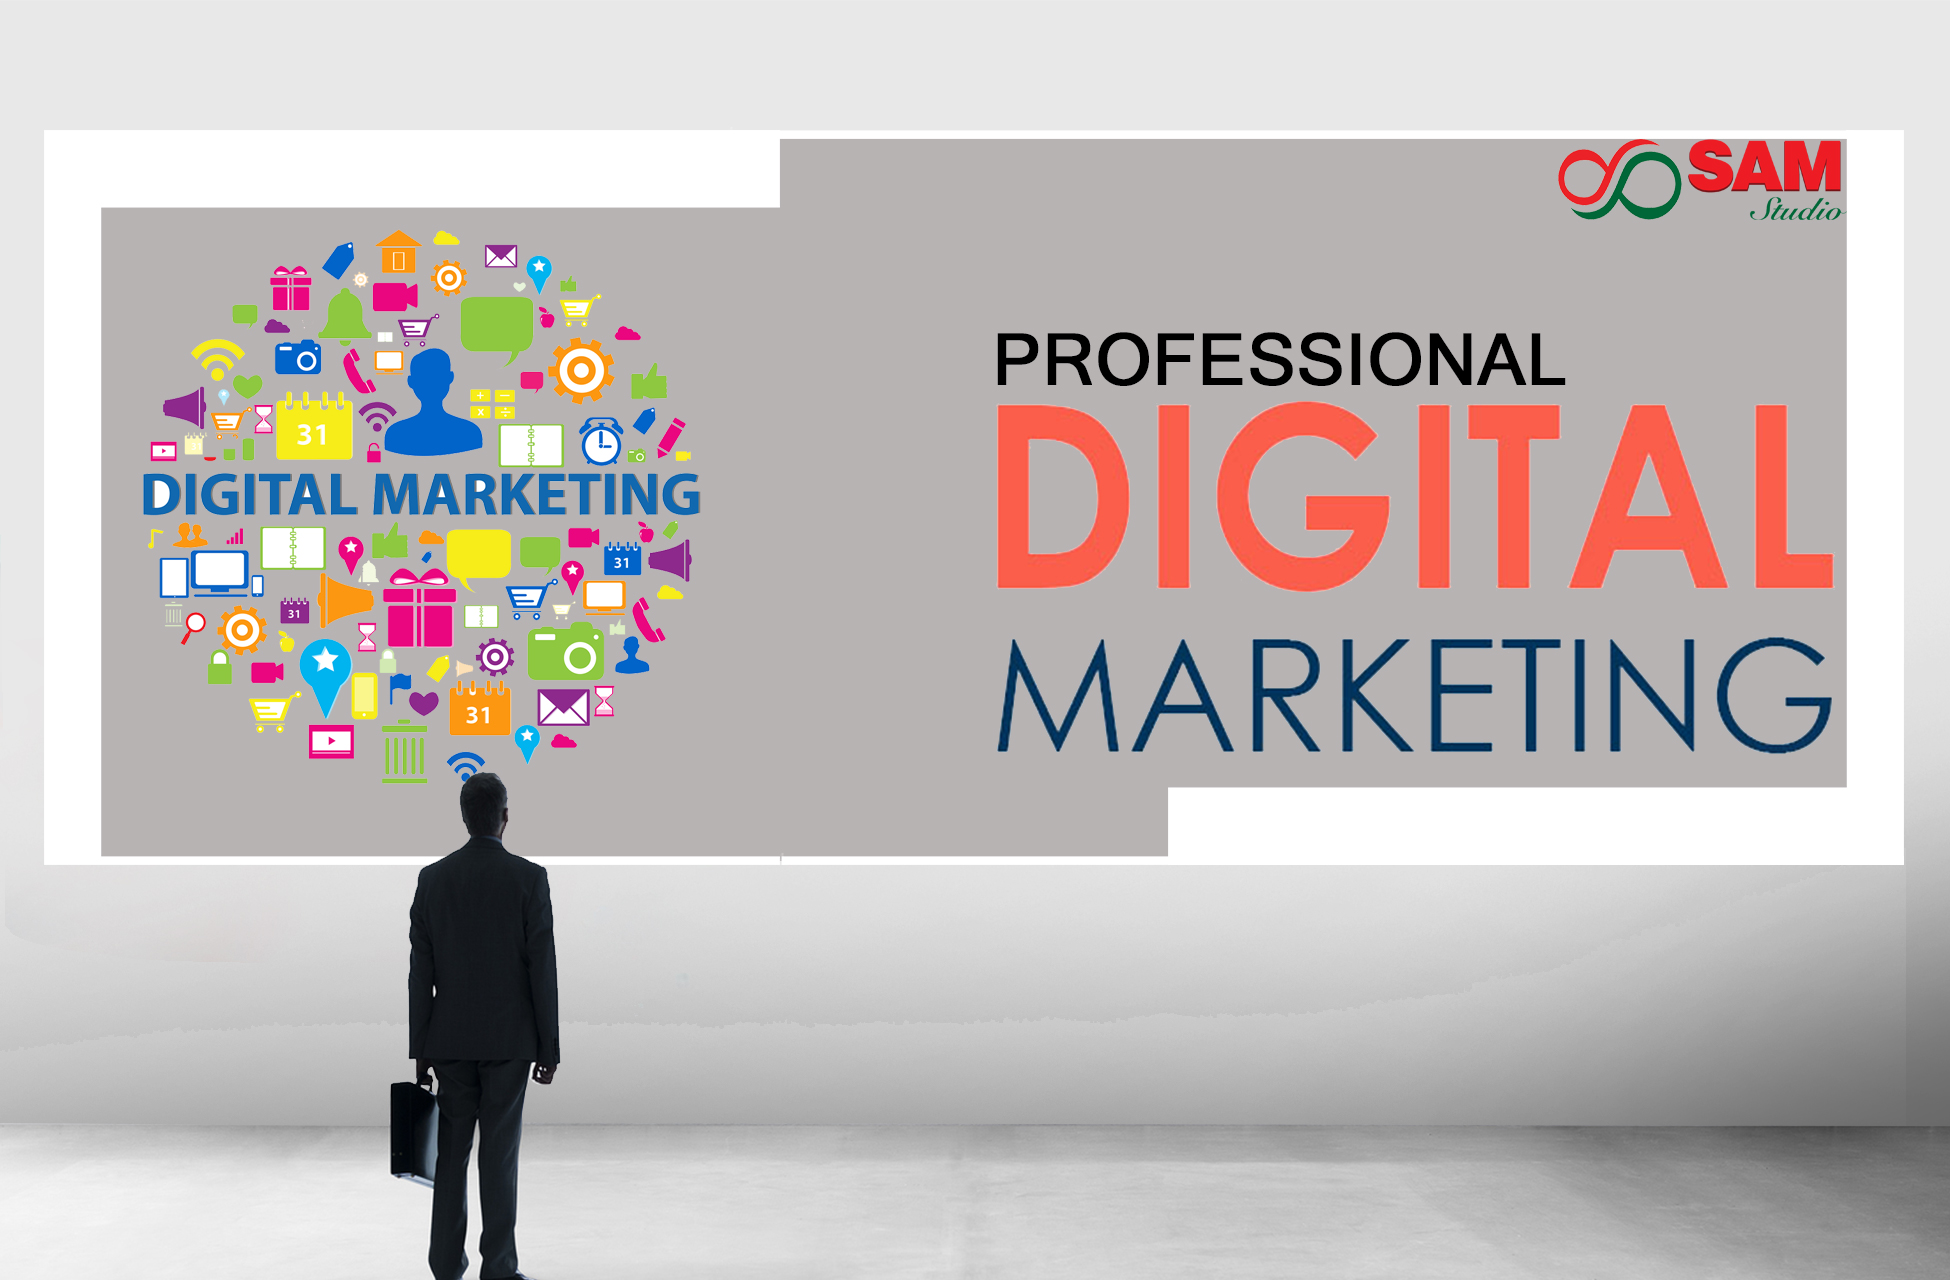 Professional Online Digital Marketing Service and SEO Consulting Provider